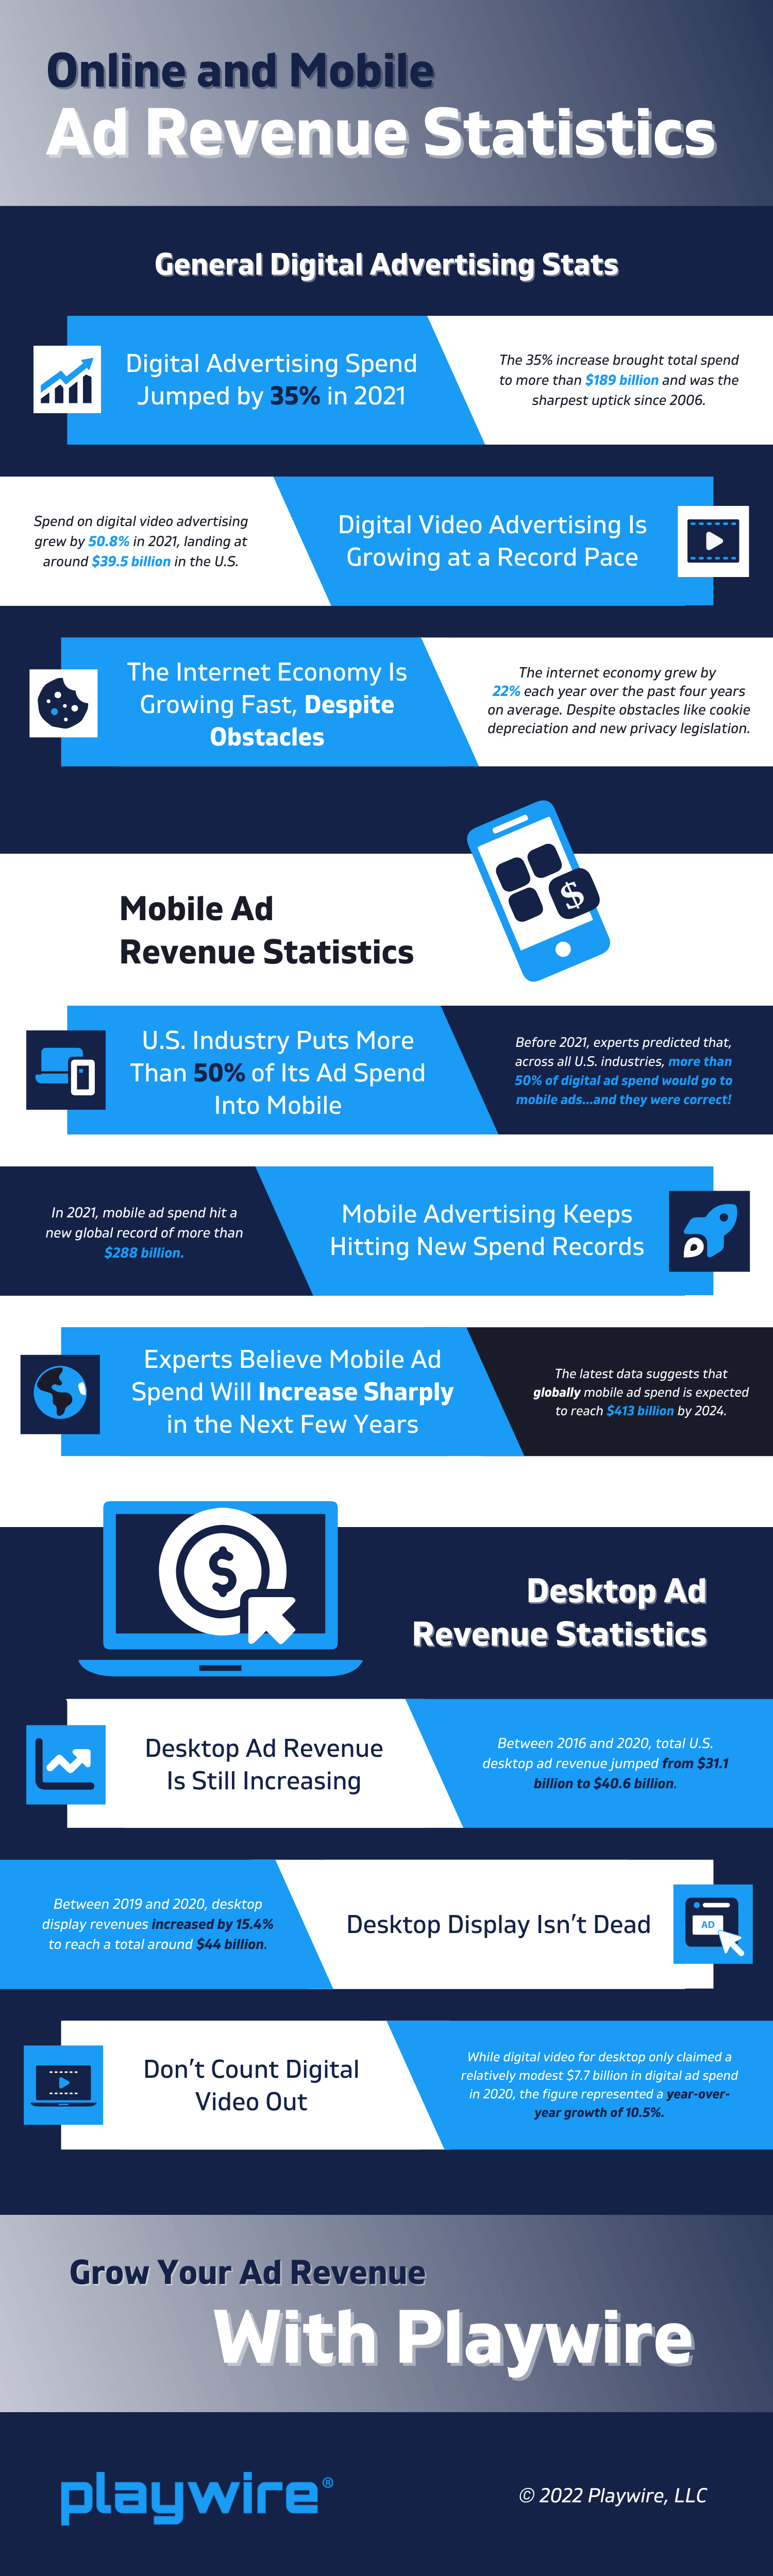 Online and Mobile Ad Revenue Stats Infographic